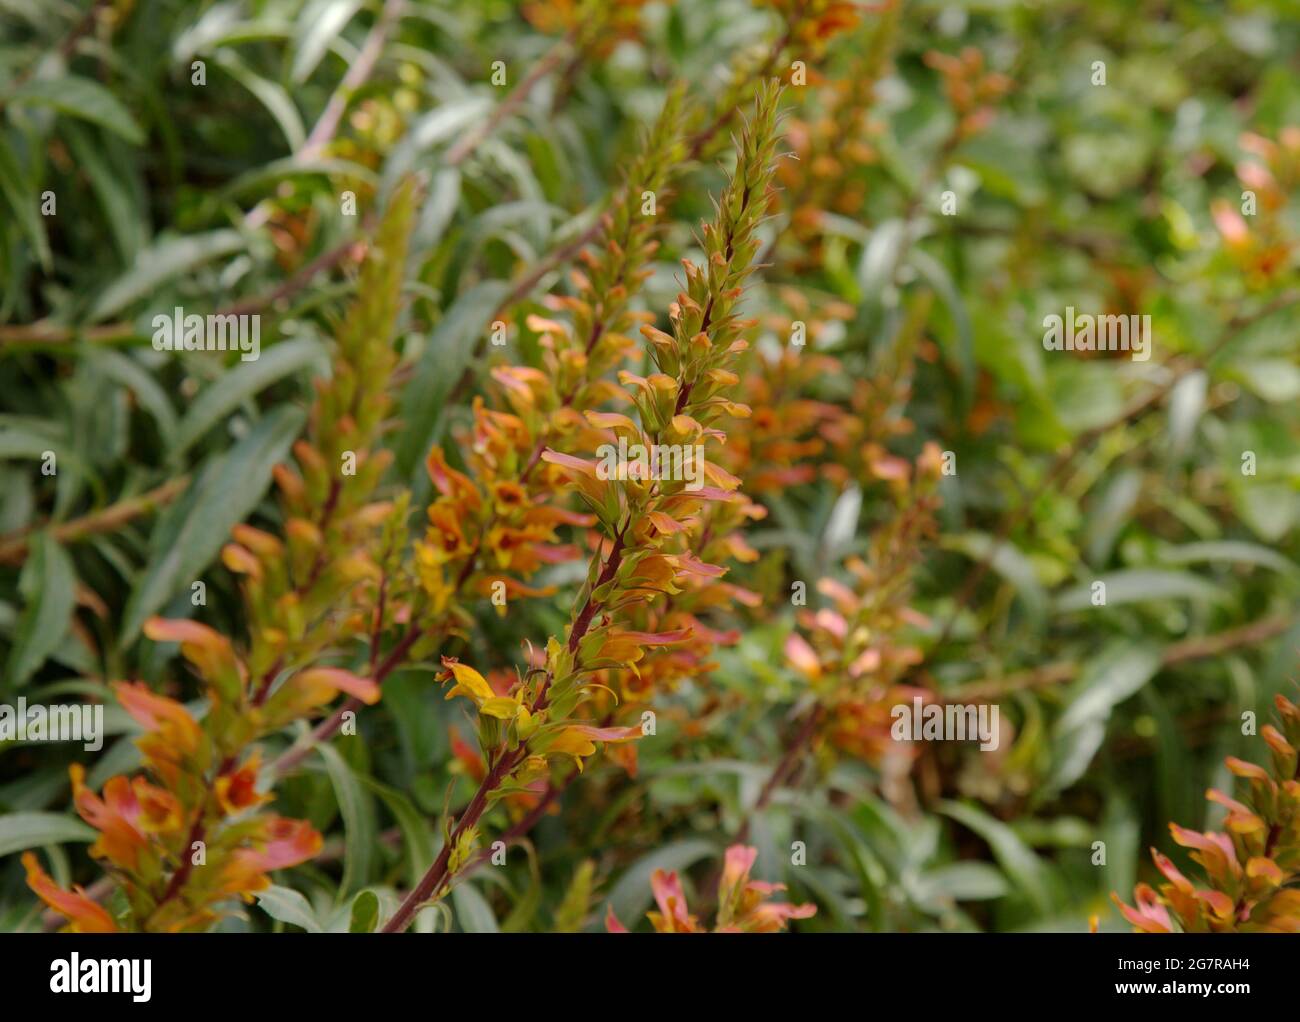 Flora of Gran Canaria - orange and red flowers of Isoplexis canariensis, plant endemic to Canary Islands, natural macro floral background Stock Photo